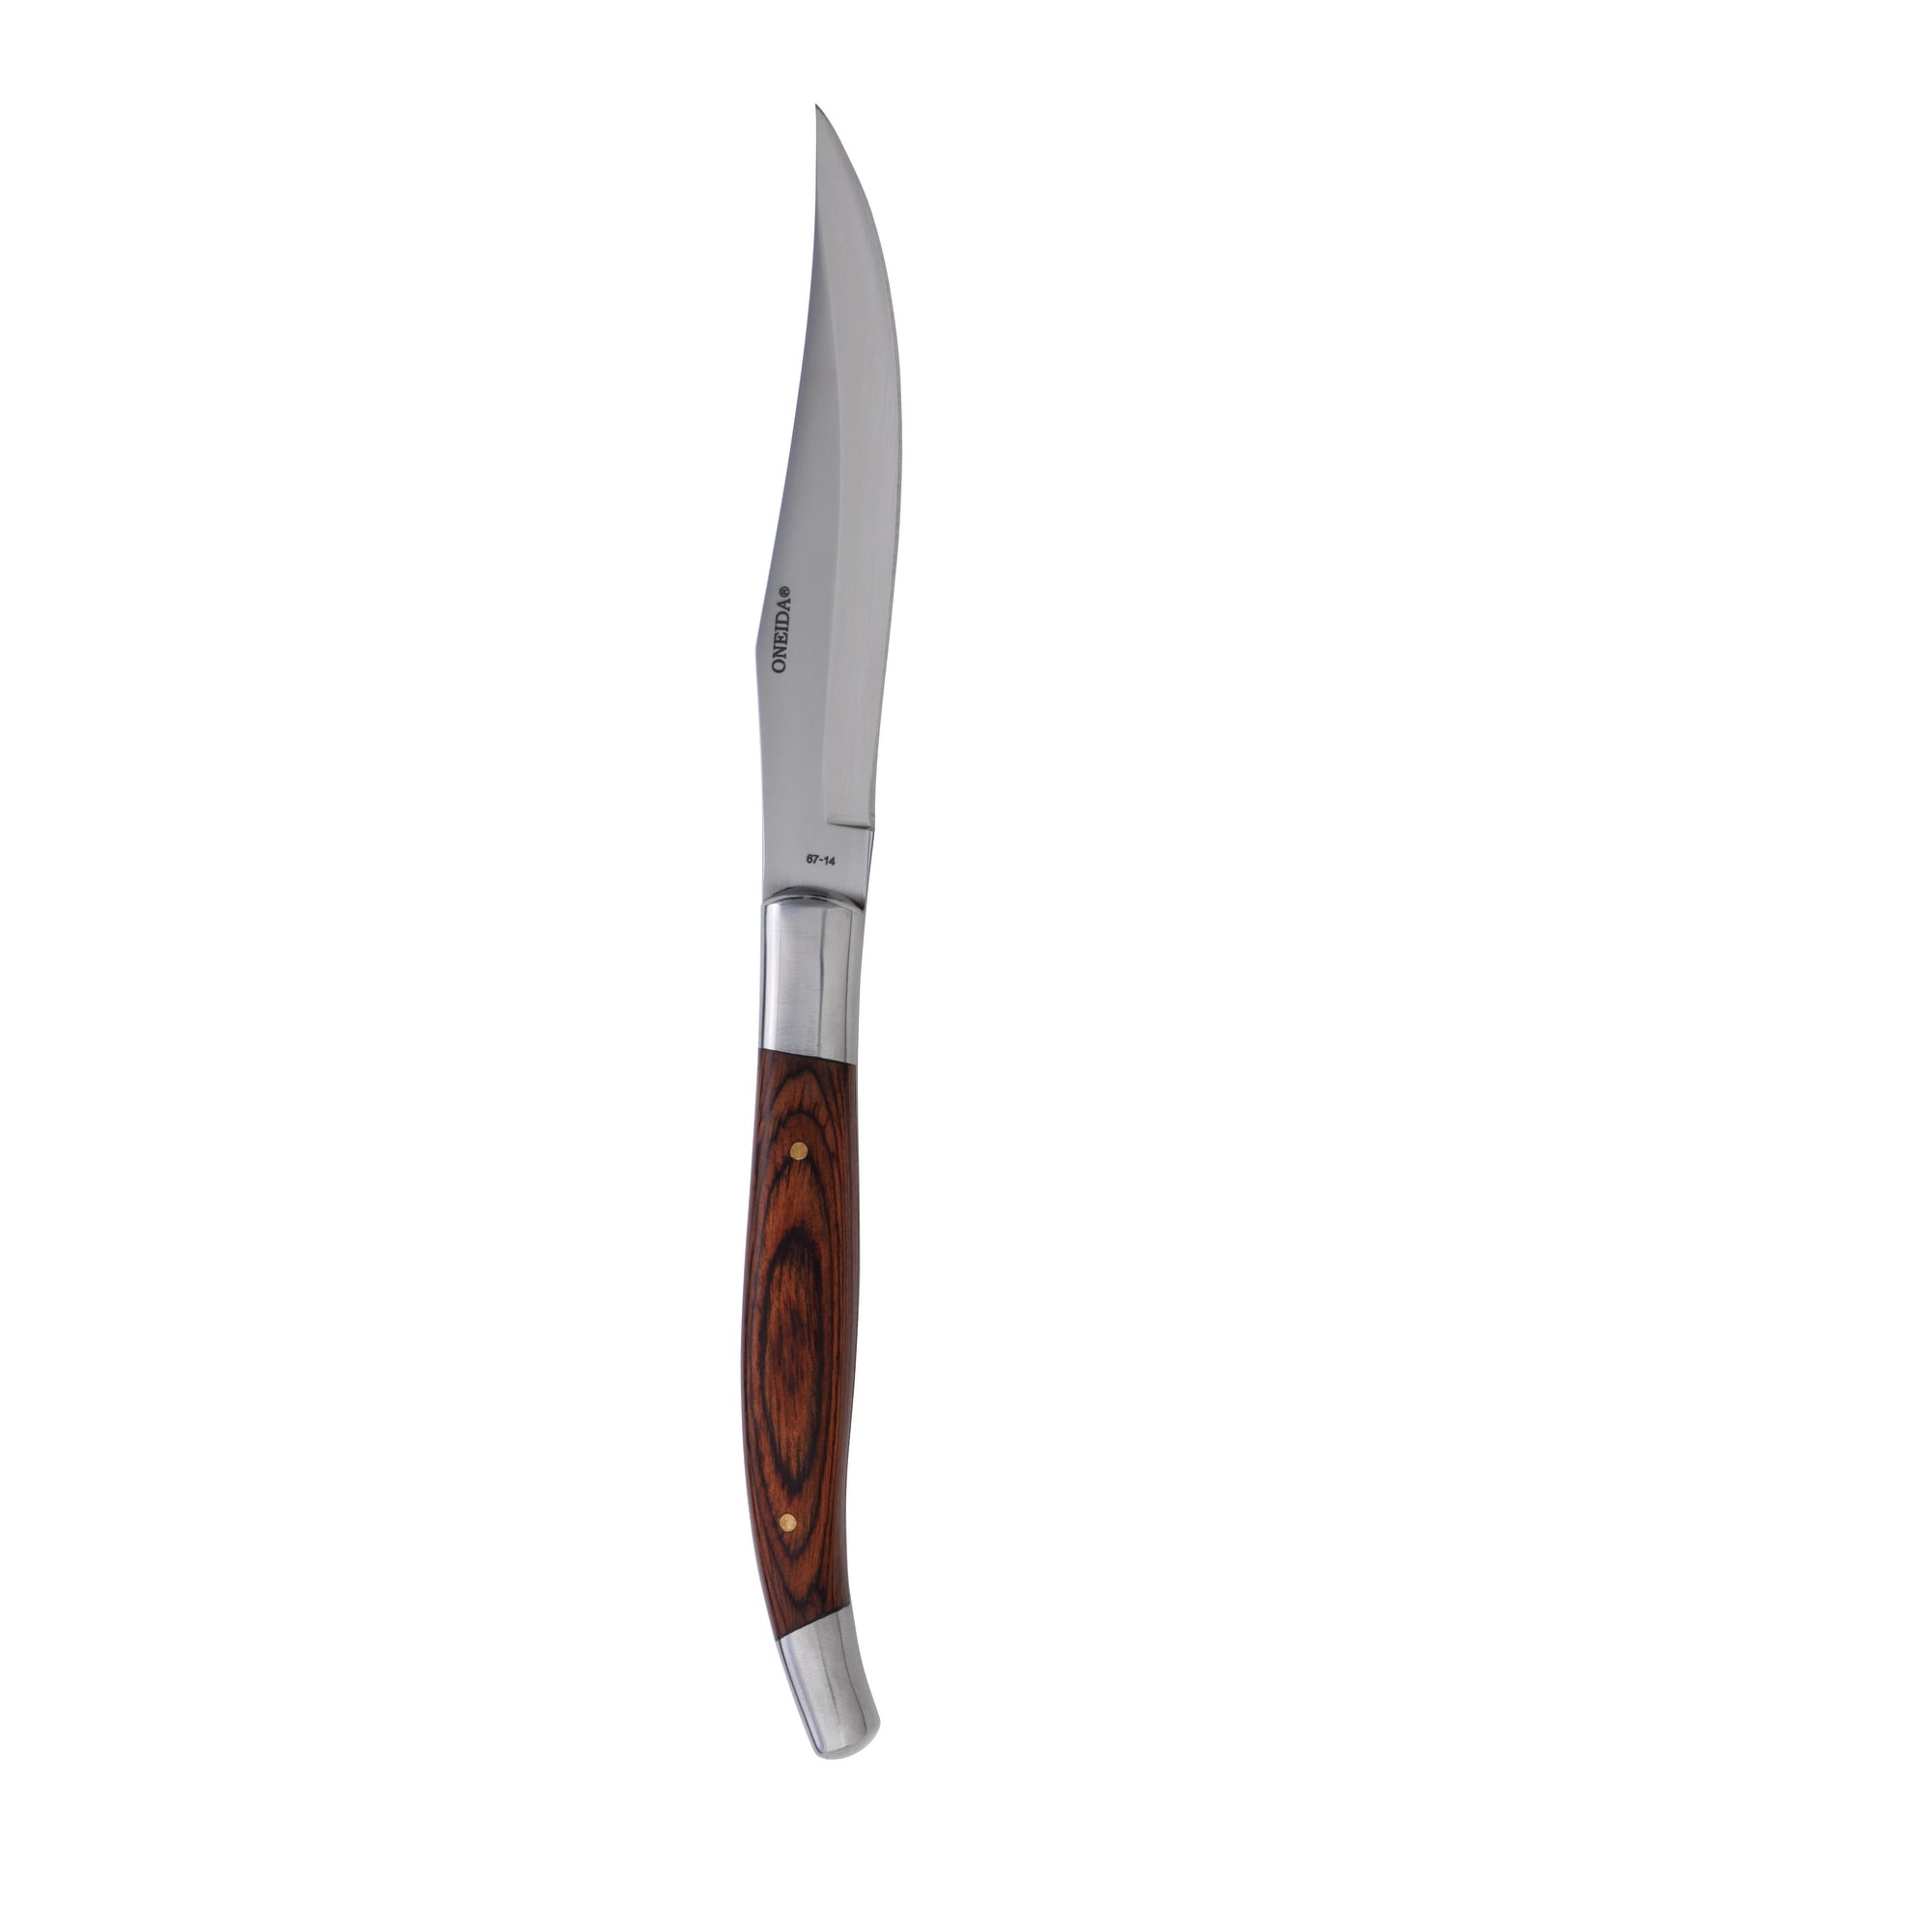 https://ak1.ostkcdn.com/images/products/is/images/direct/7ea9a3e952a0b4c51040ff970436705e5efa0246/Oneida-18-0-Stainless-Steel-Steak-Knives-Rustic-Wood-Steak-Knives-%28Set-of-12%29.jpg